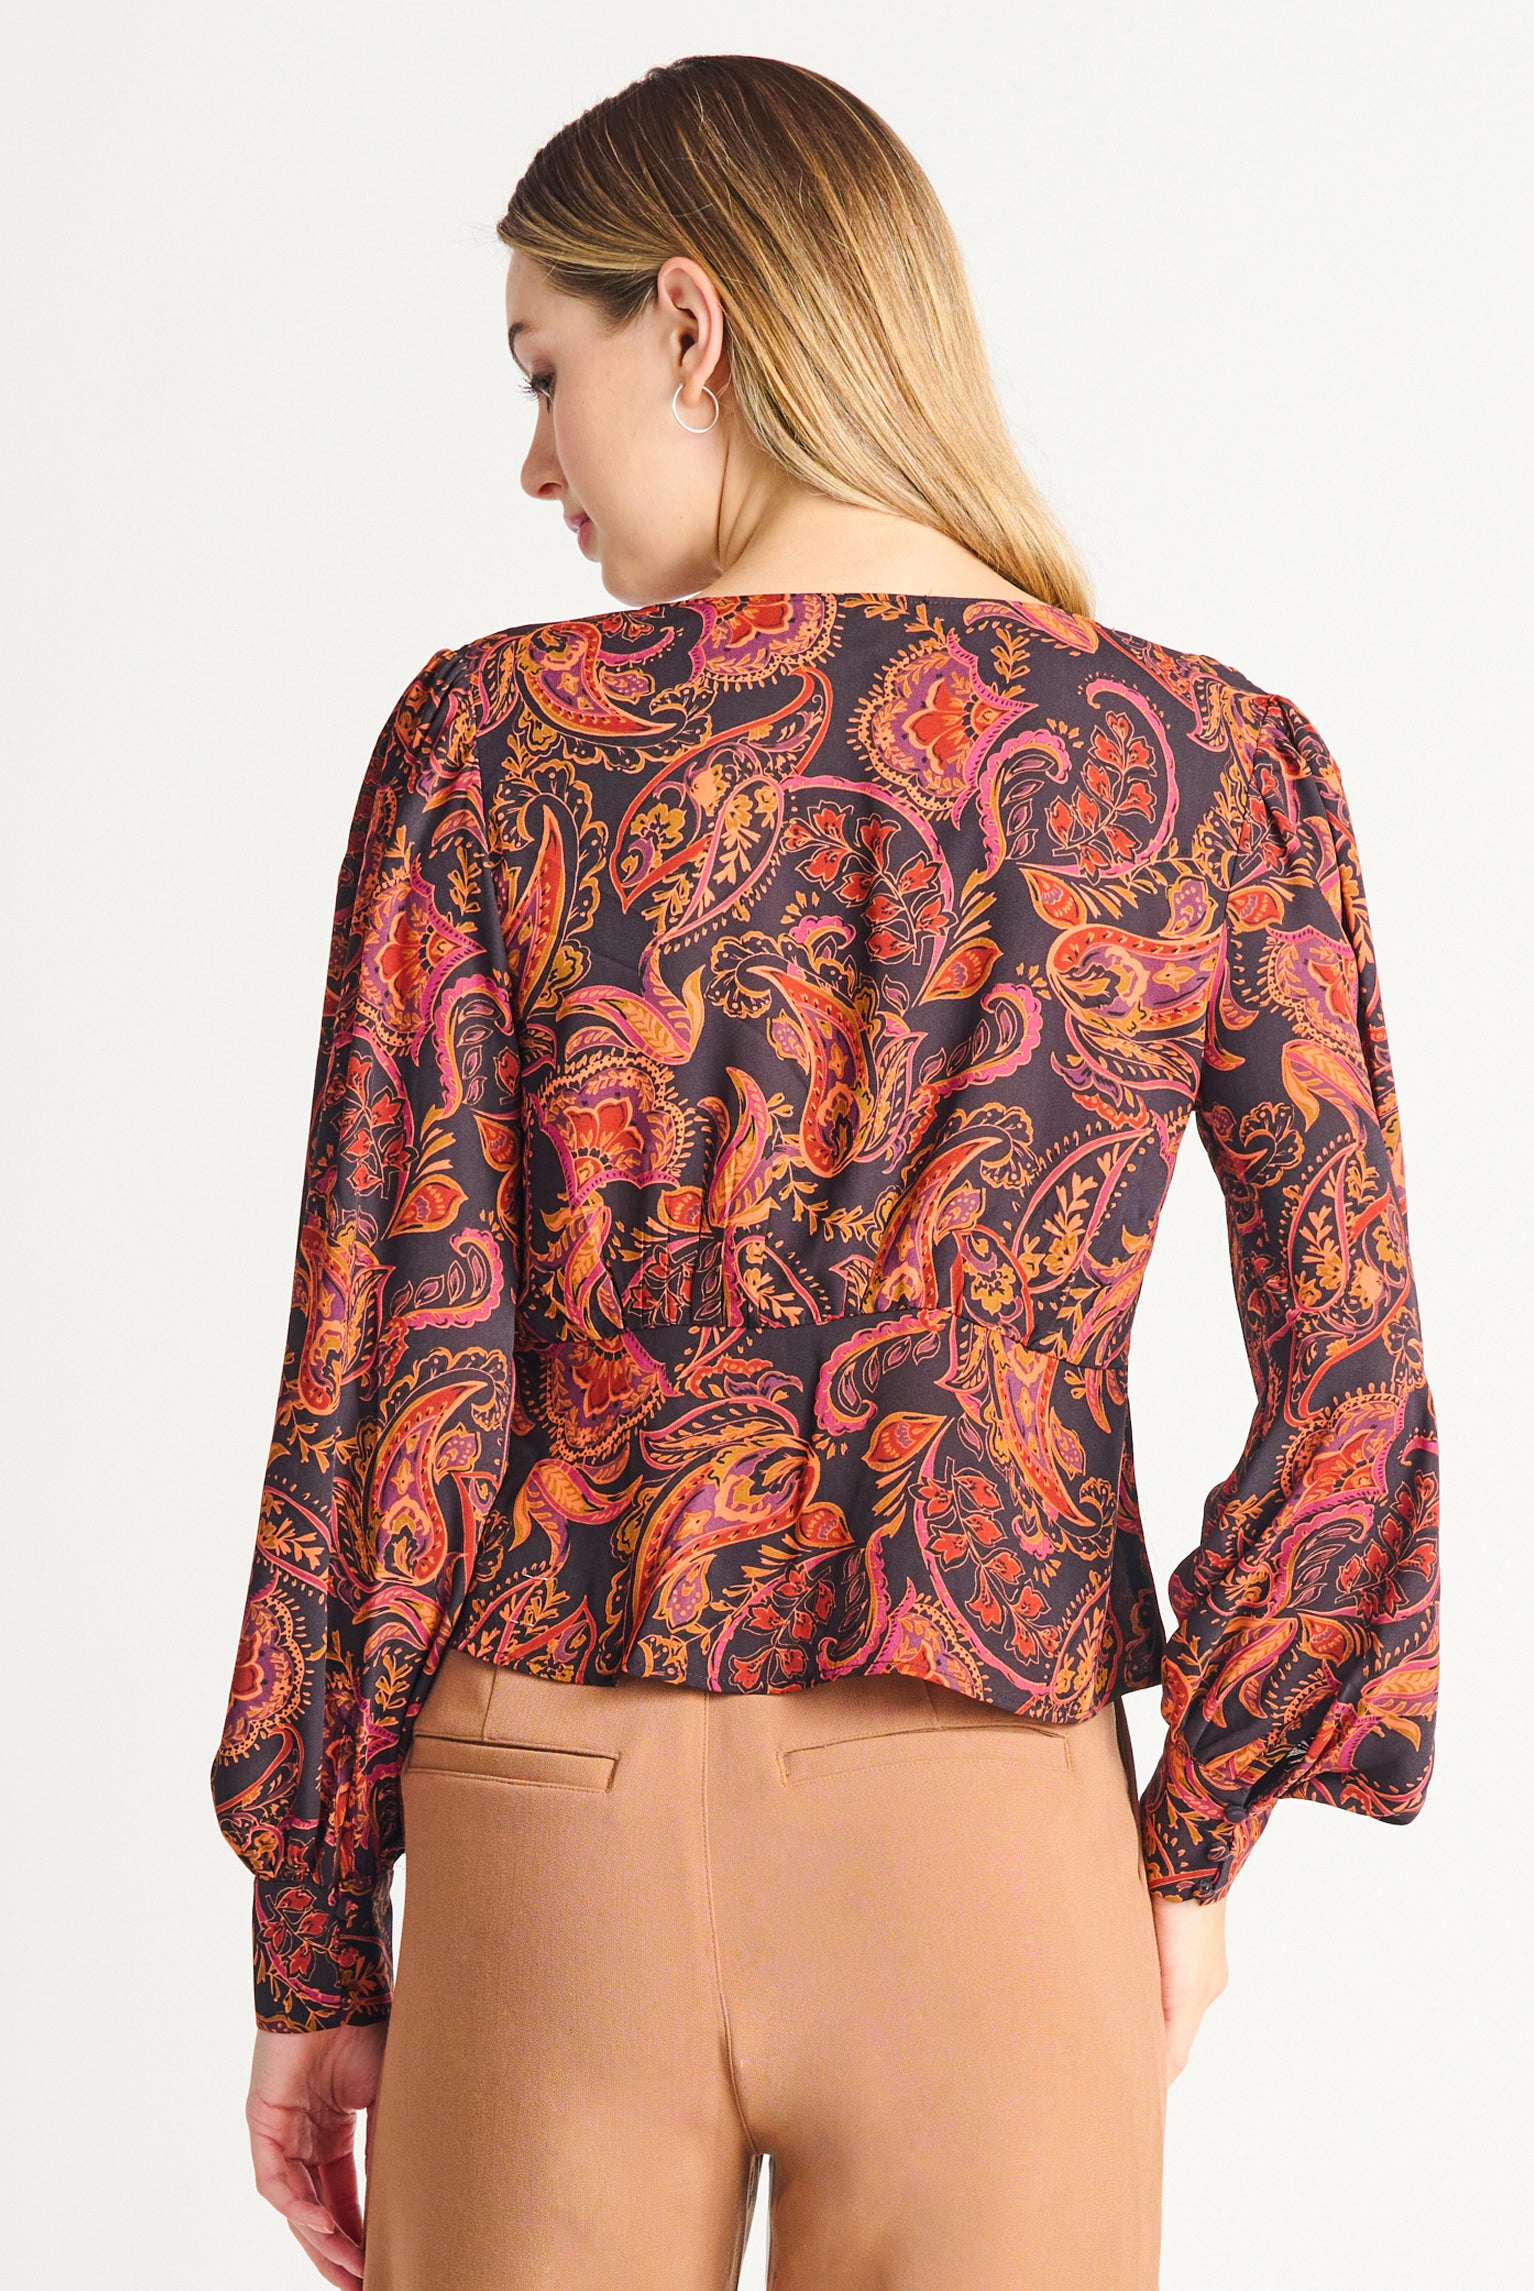 Paisley Phoenix V-Neck Blouse-Long Sleeves-Vixen Collection, Day Spa and Women's Boutique Located in Seattle, Washington